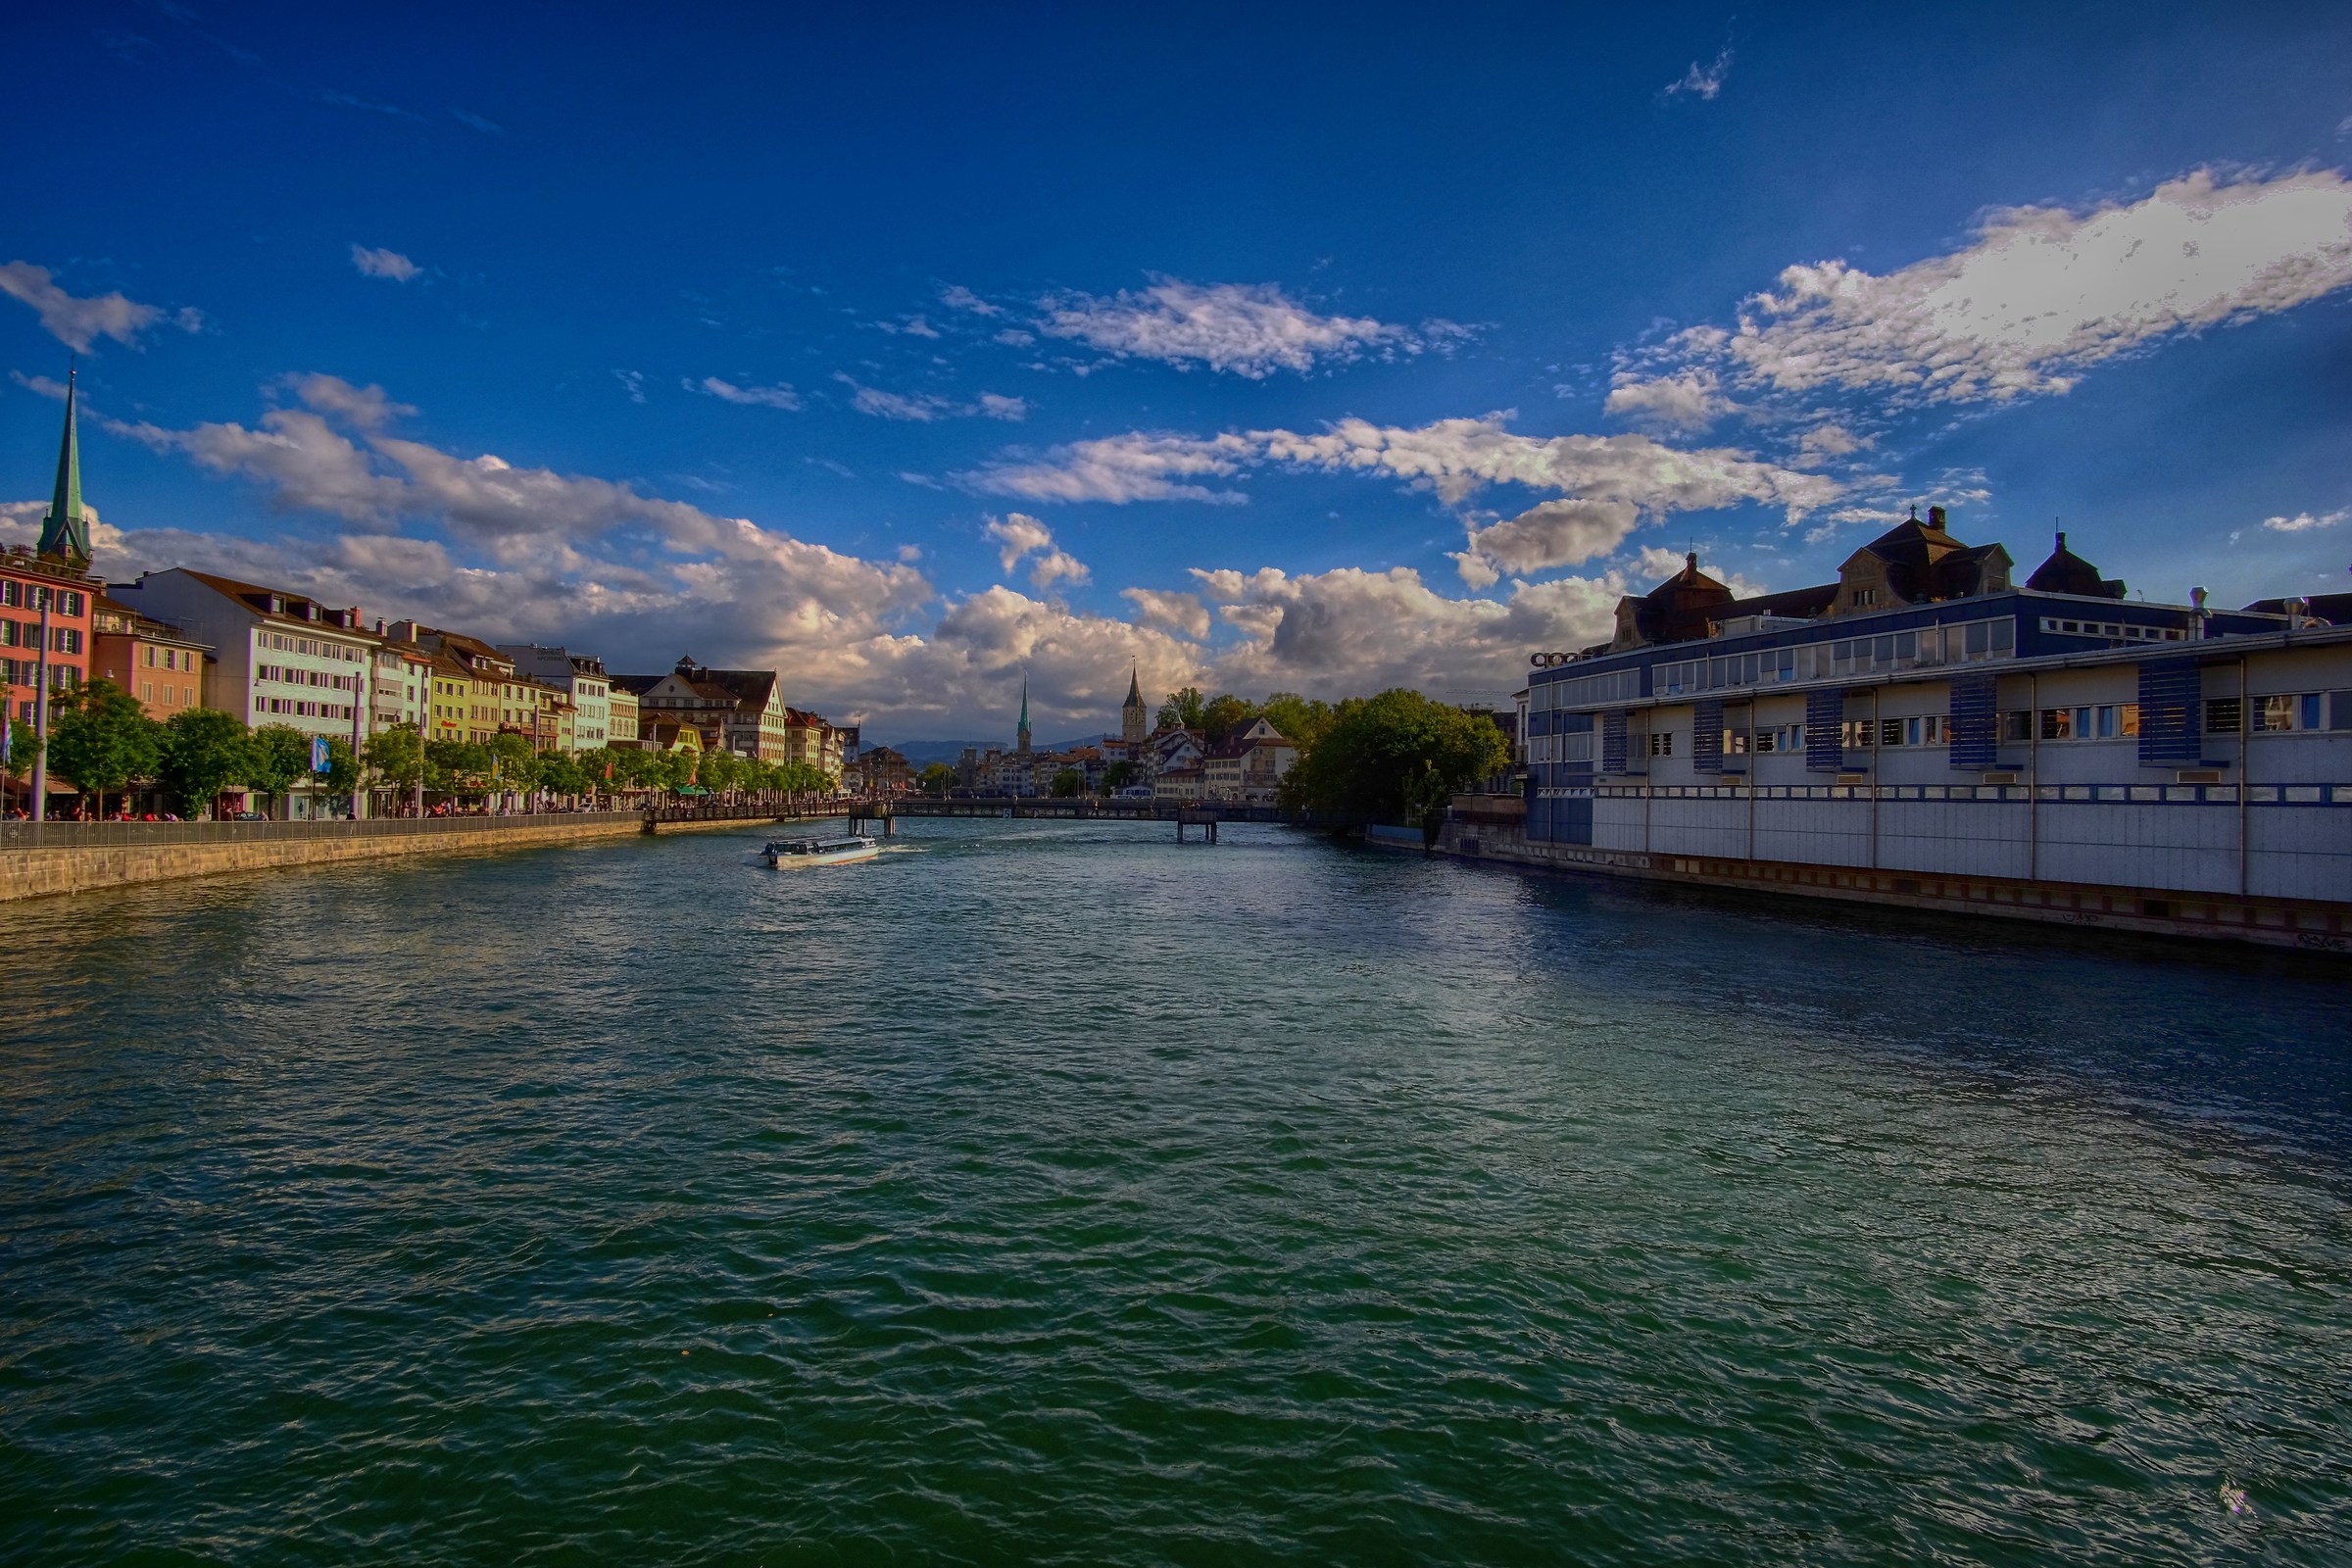 Zurich from the lake...